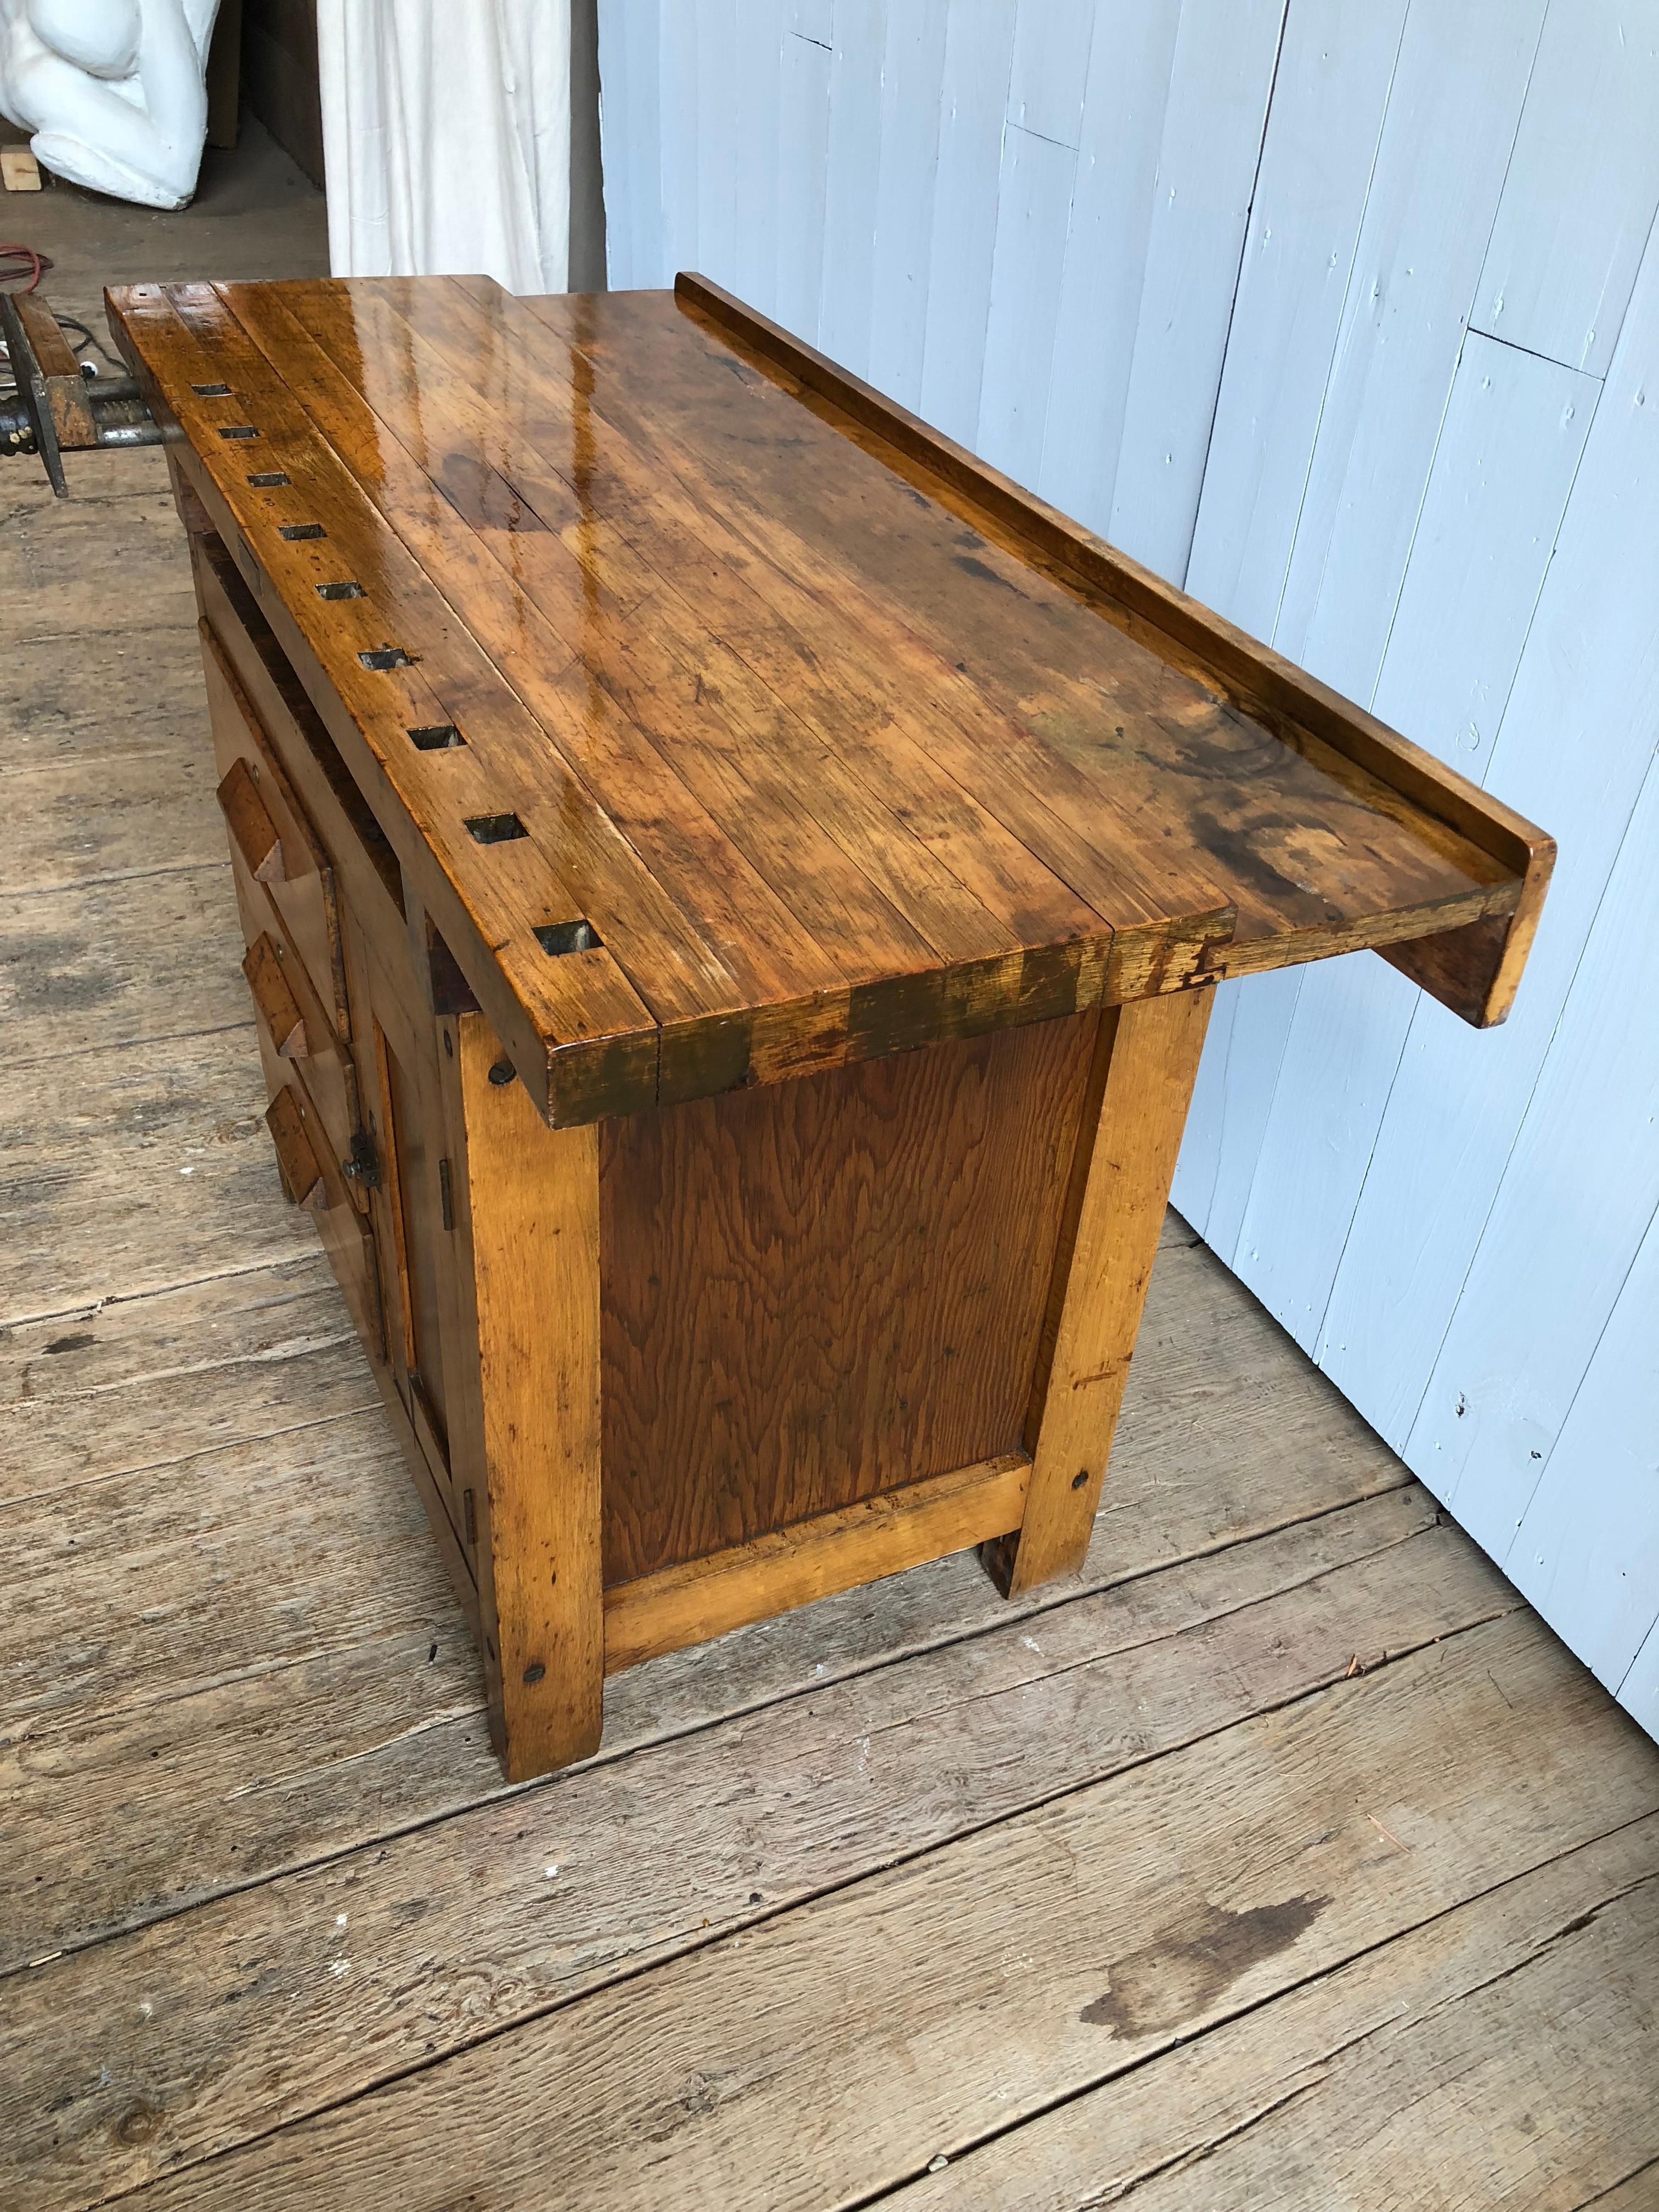 An unusual small size industrial work bench circa 1930 in maple, with a butcher block top, a vice clamp, 3 large drawers and a storage cabinet. Would be perfect for a small bar - trays can be stored in the space under the top, bottles in the cabinet